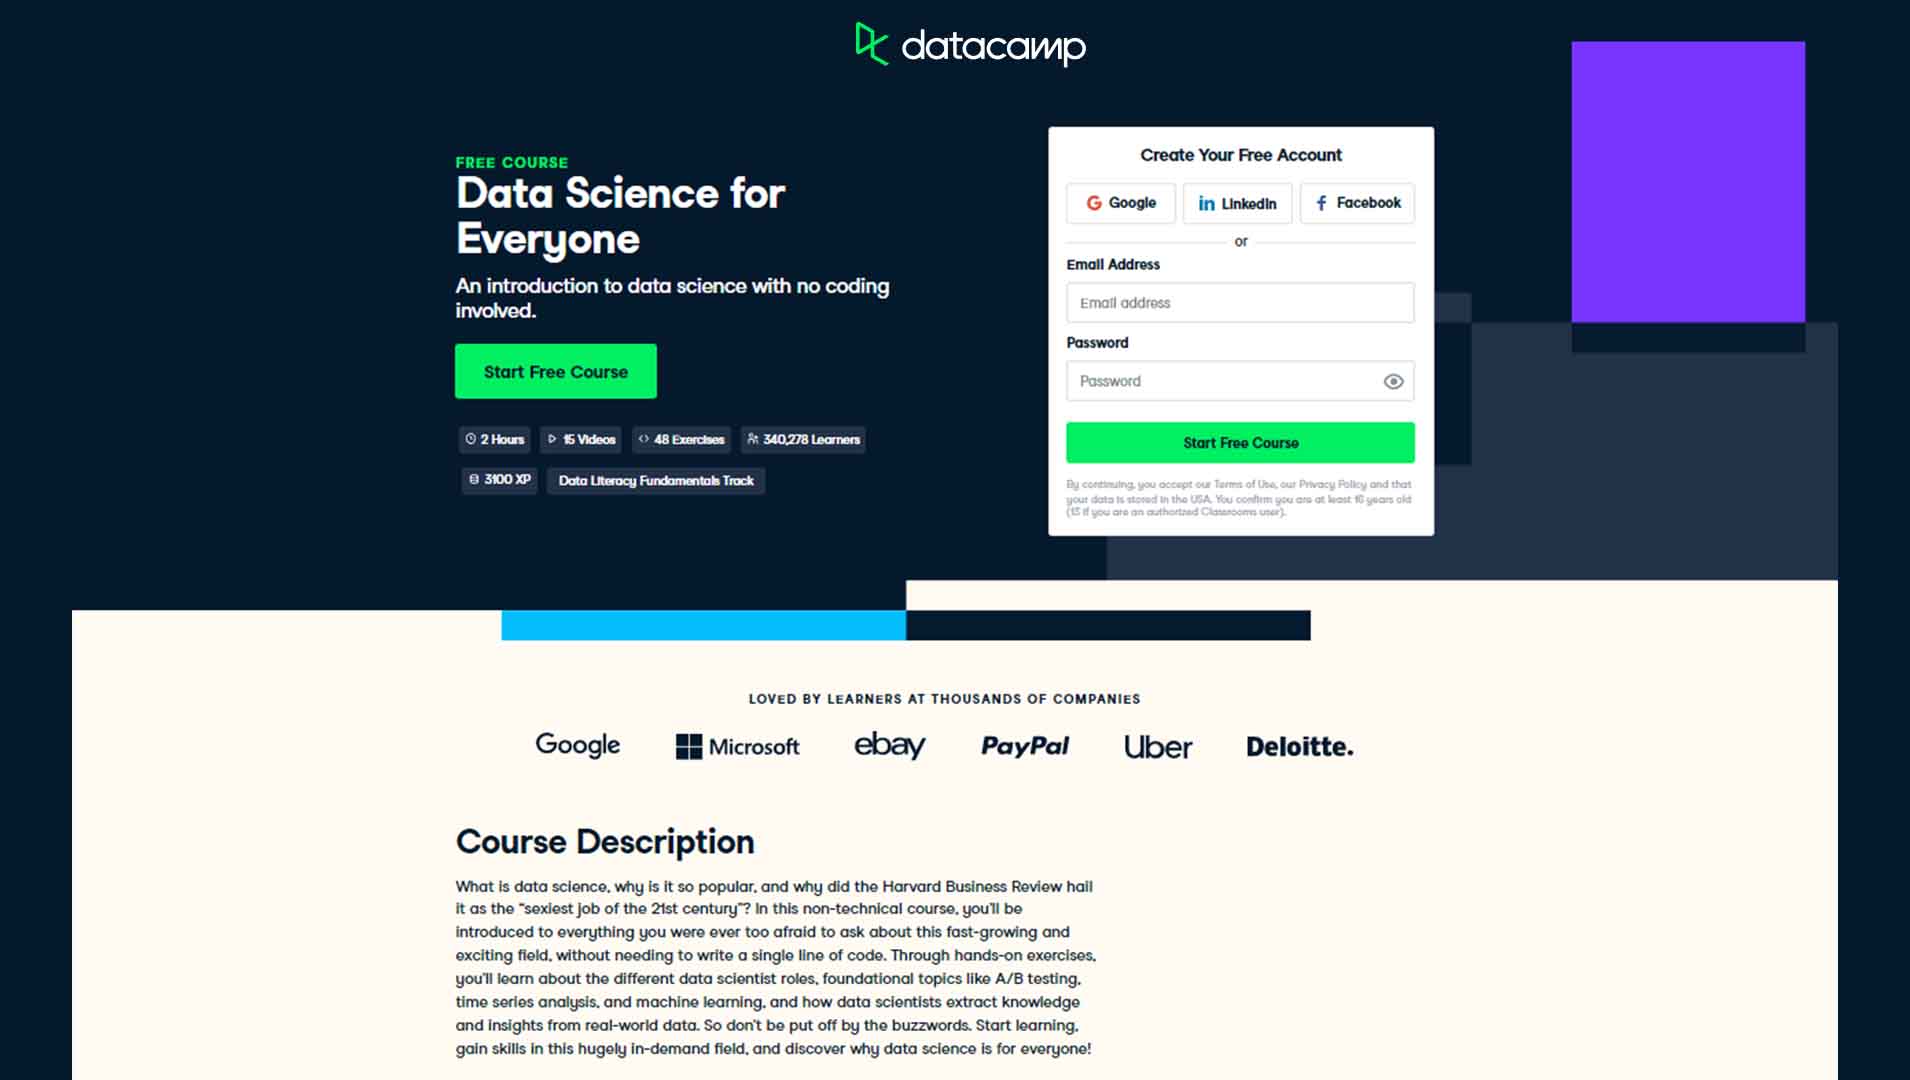 Data Science for Everyone